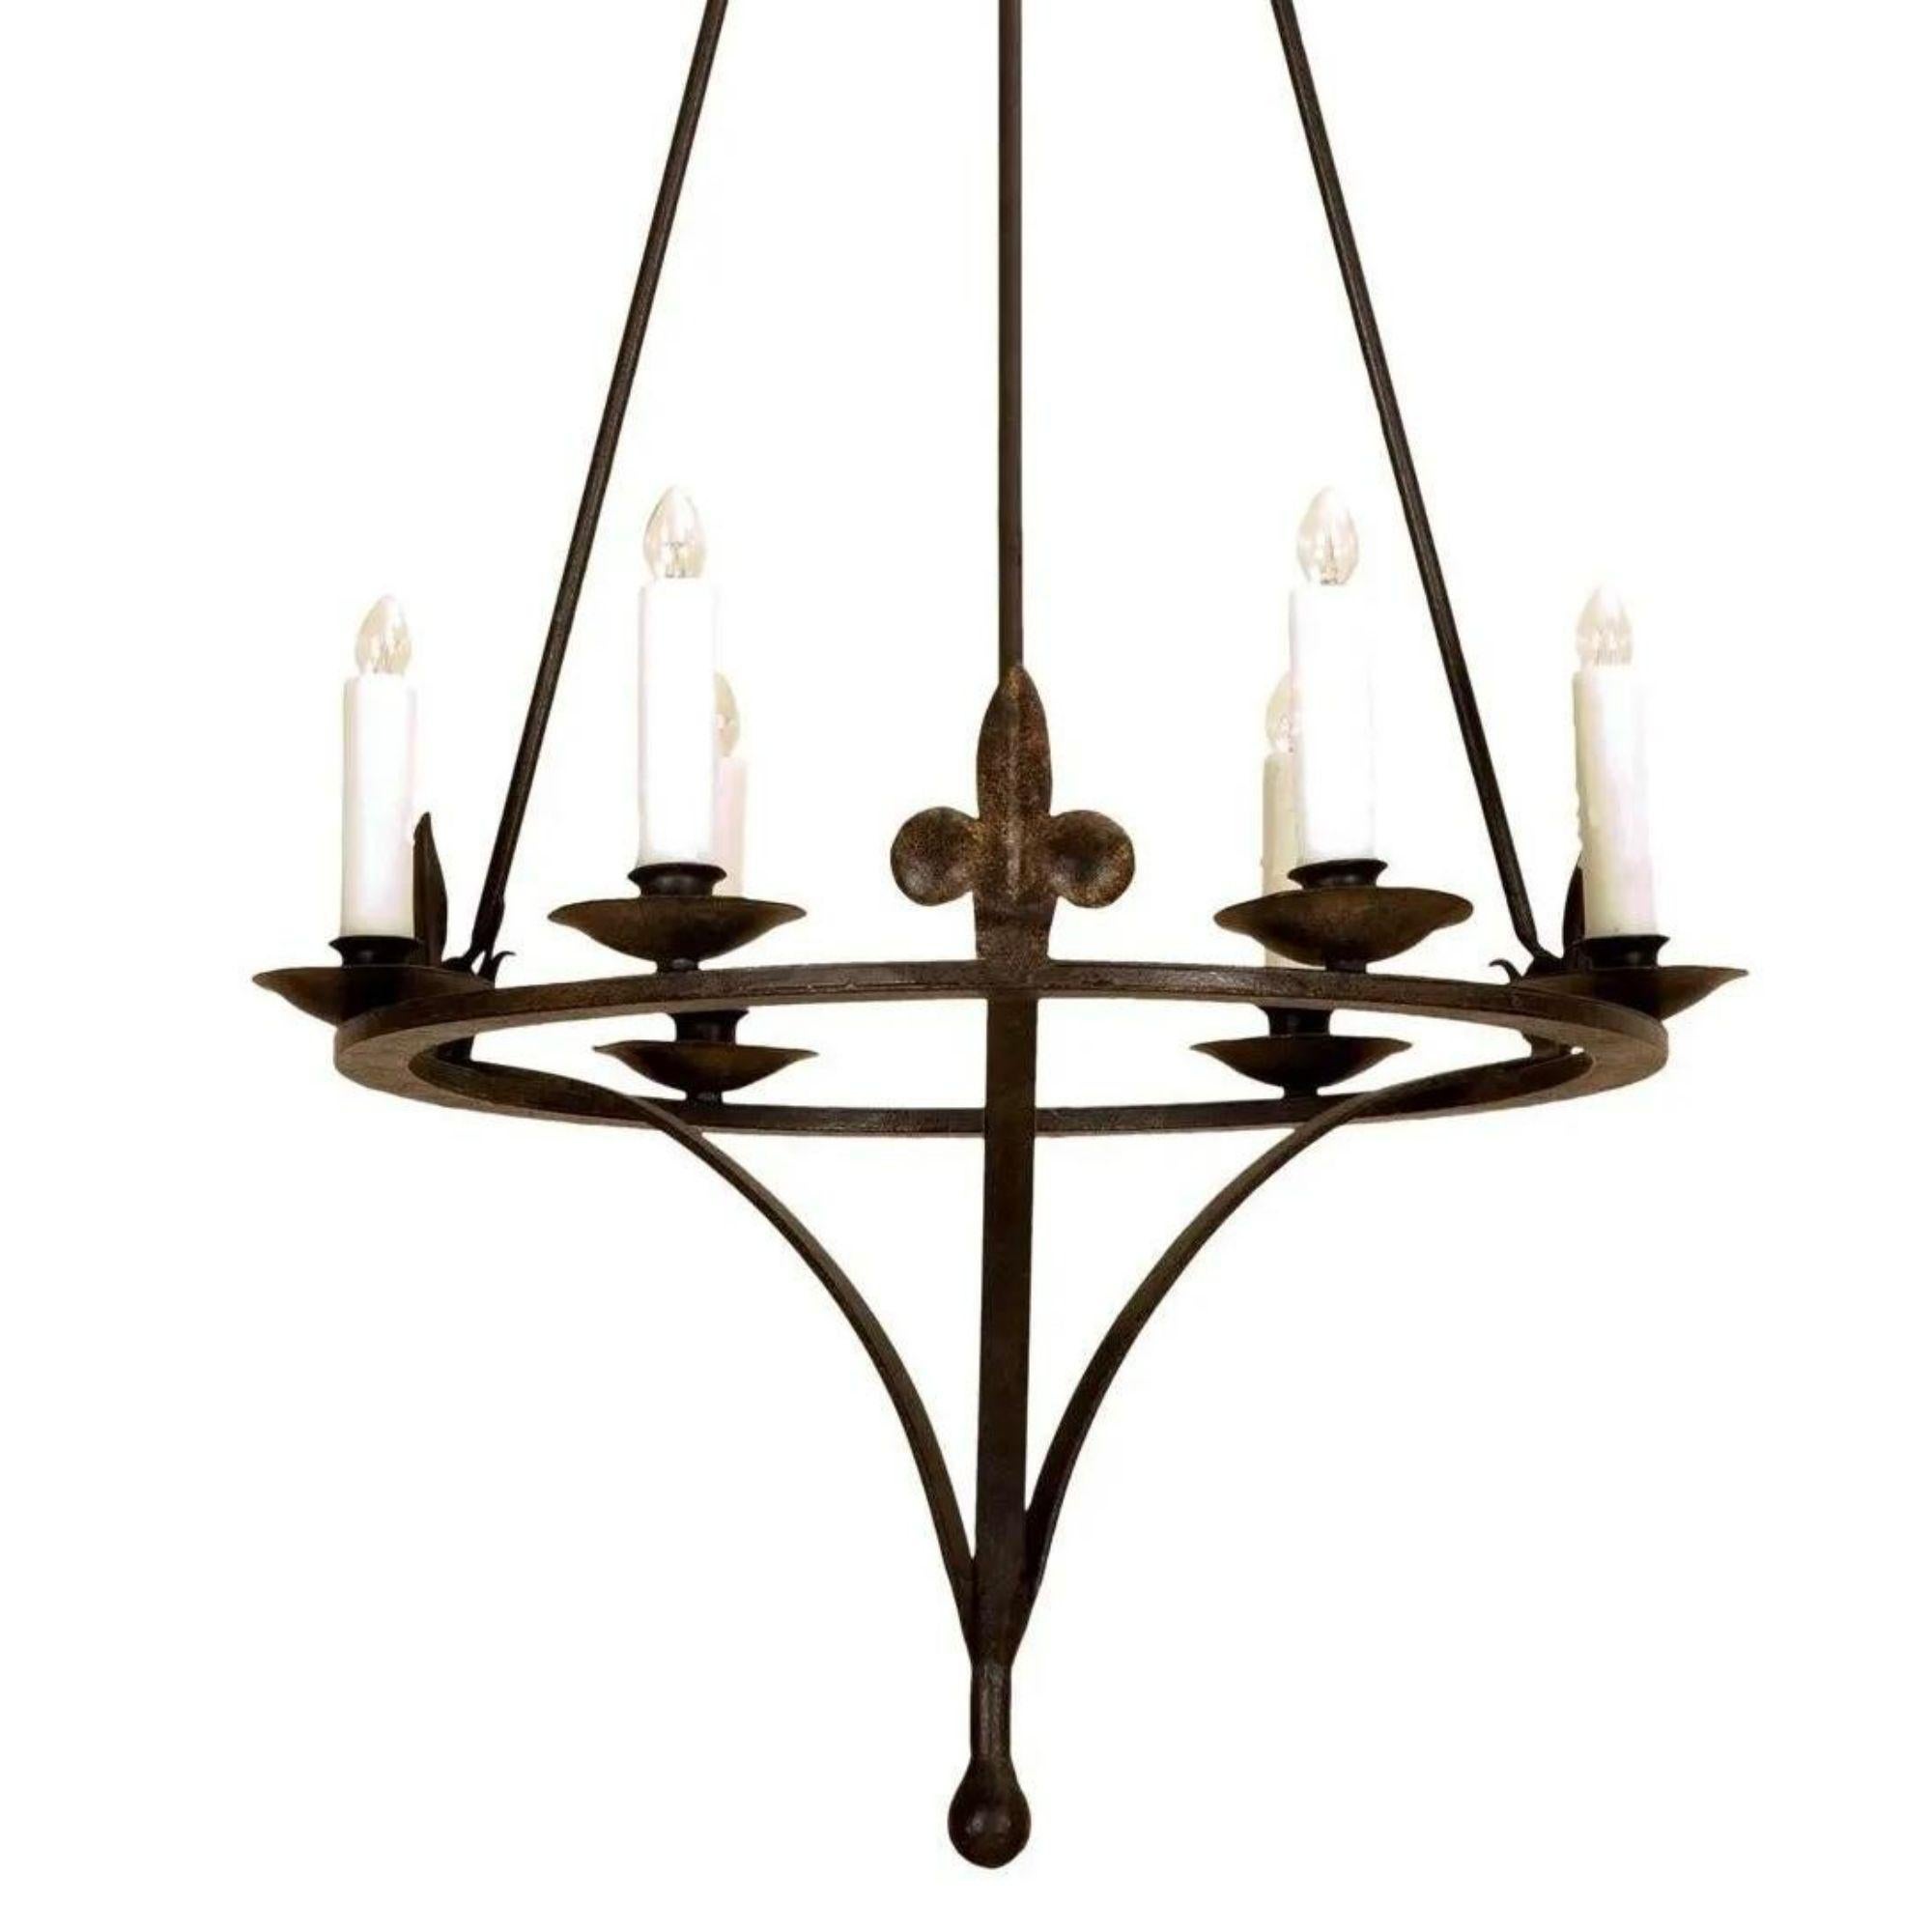 Rustic Spanish Colonial Wrought Iron Six Light Chandelier by Randy Esada For Sale